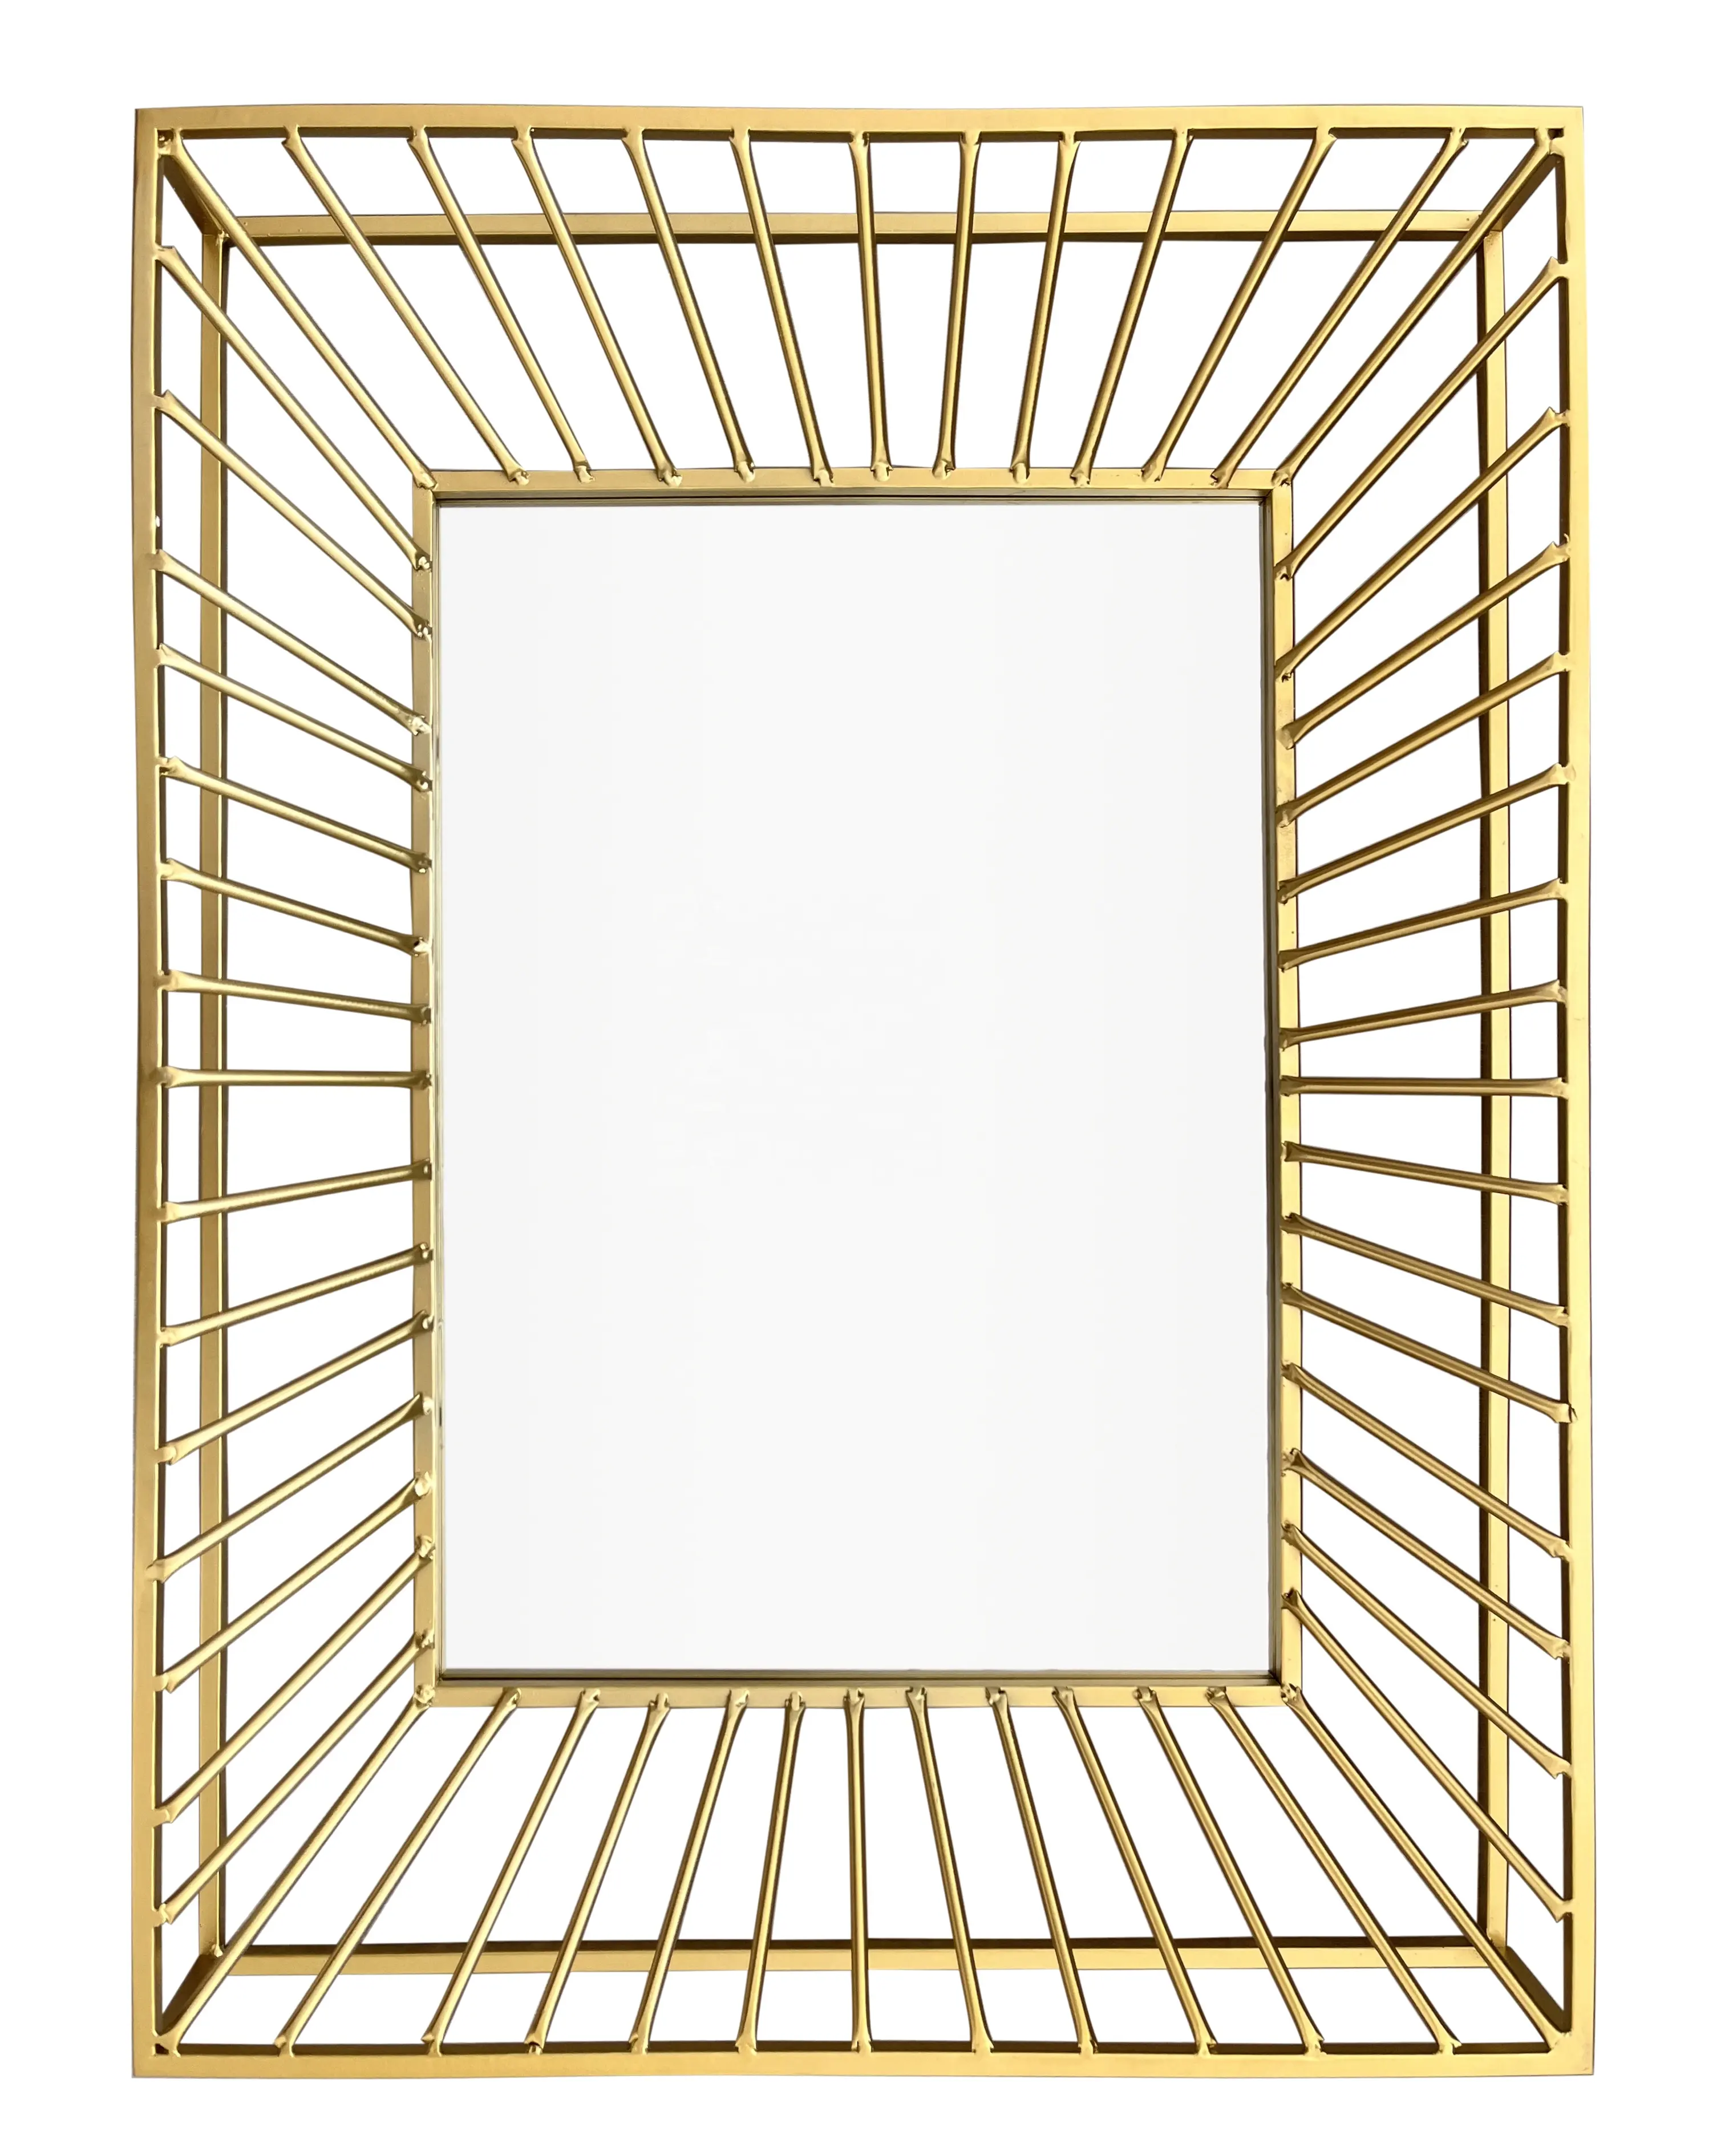 Nordic Modern Large rectangle Wall Mirror Art Gold Metal Frame Minimalist Design for Home Decor